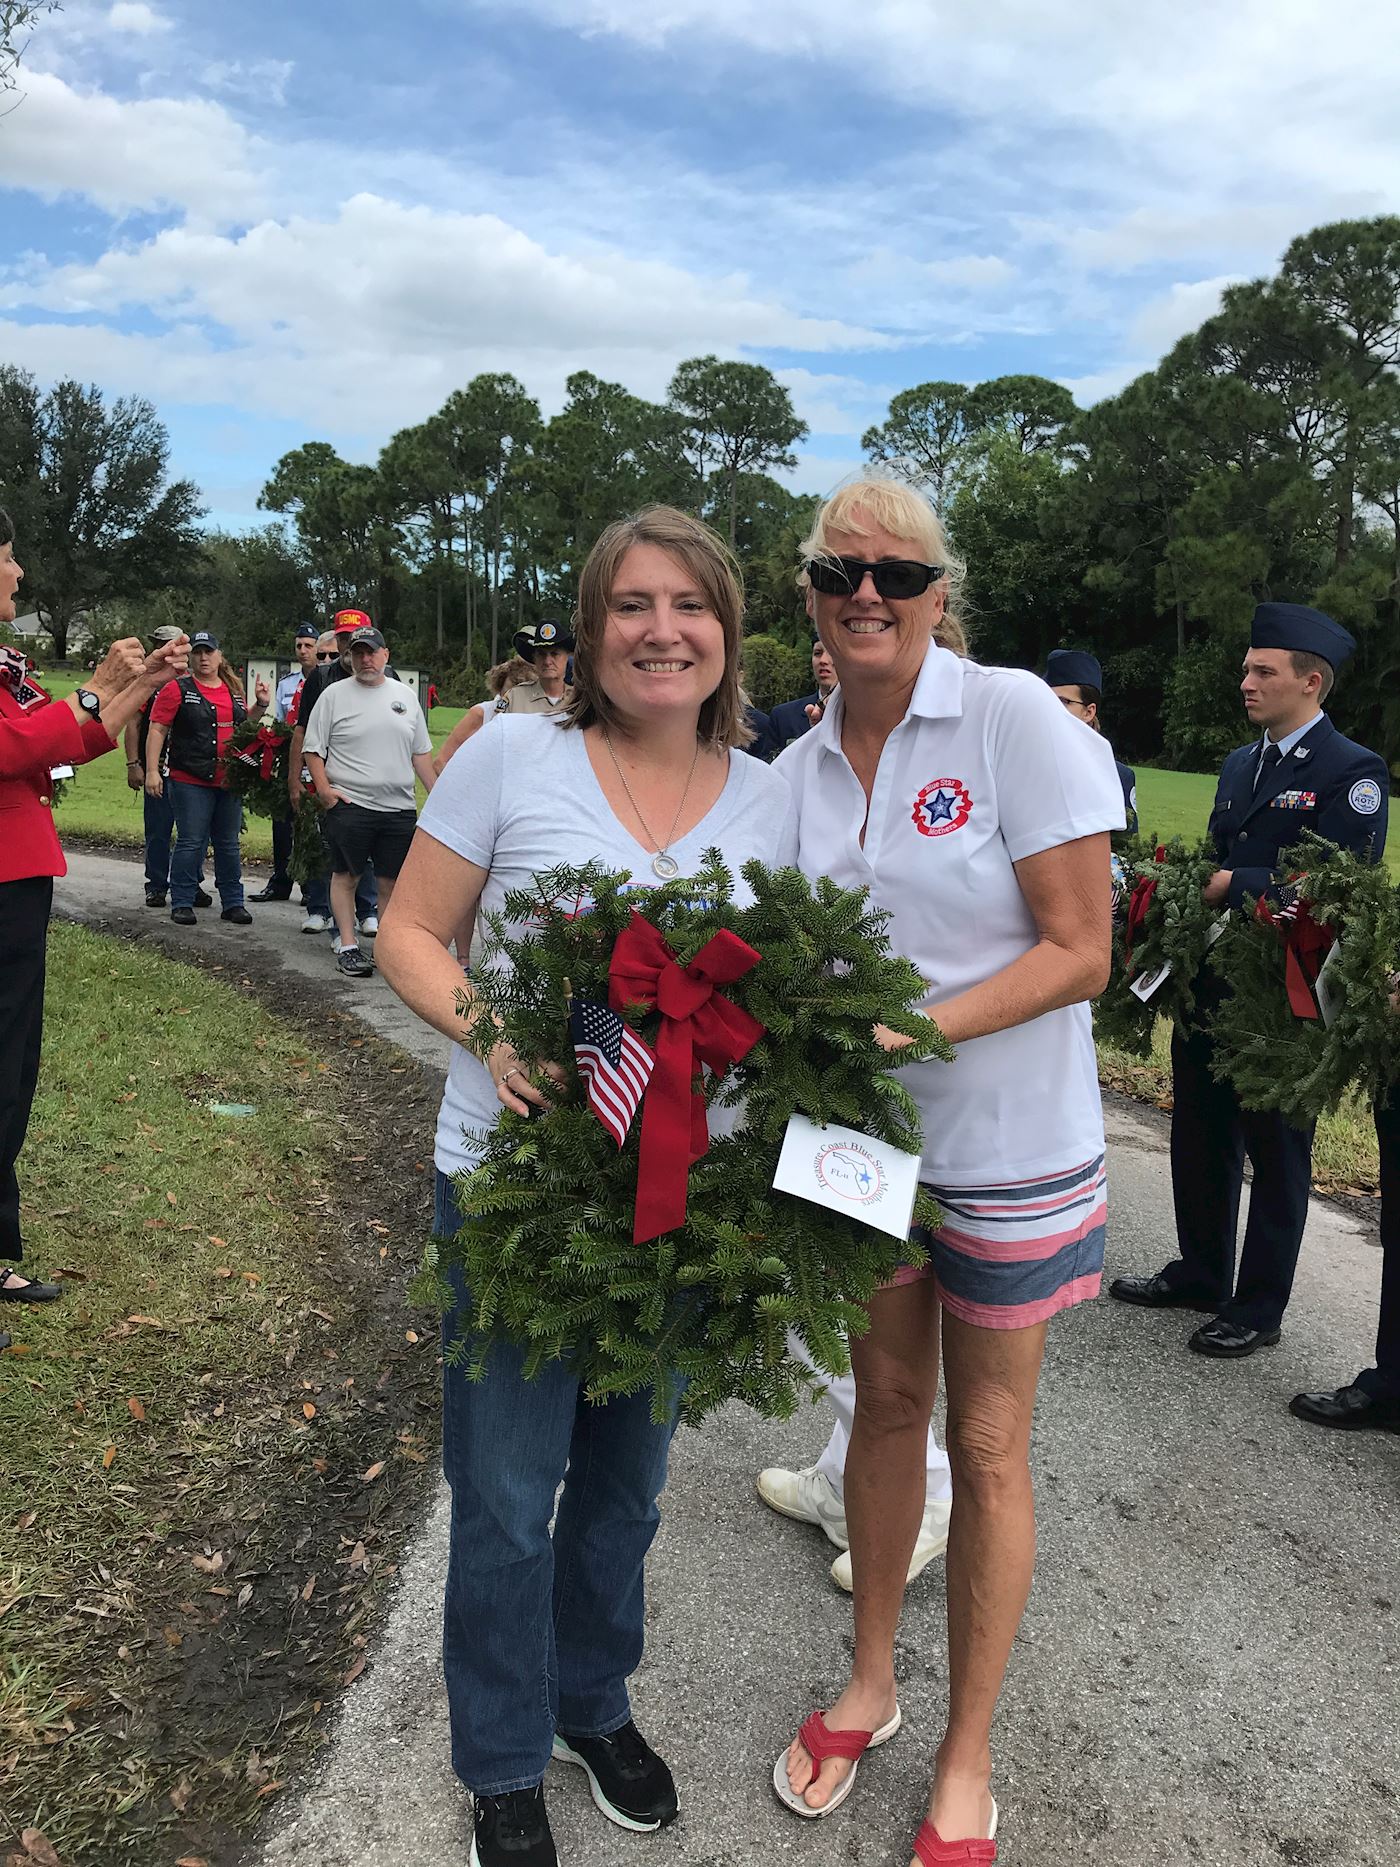 We were honored to lay a wreath on behalf of our Treasure Coast Blue Star Mothers Chapter.